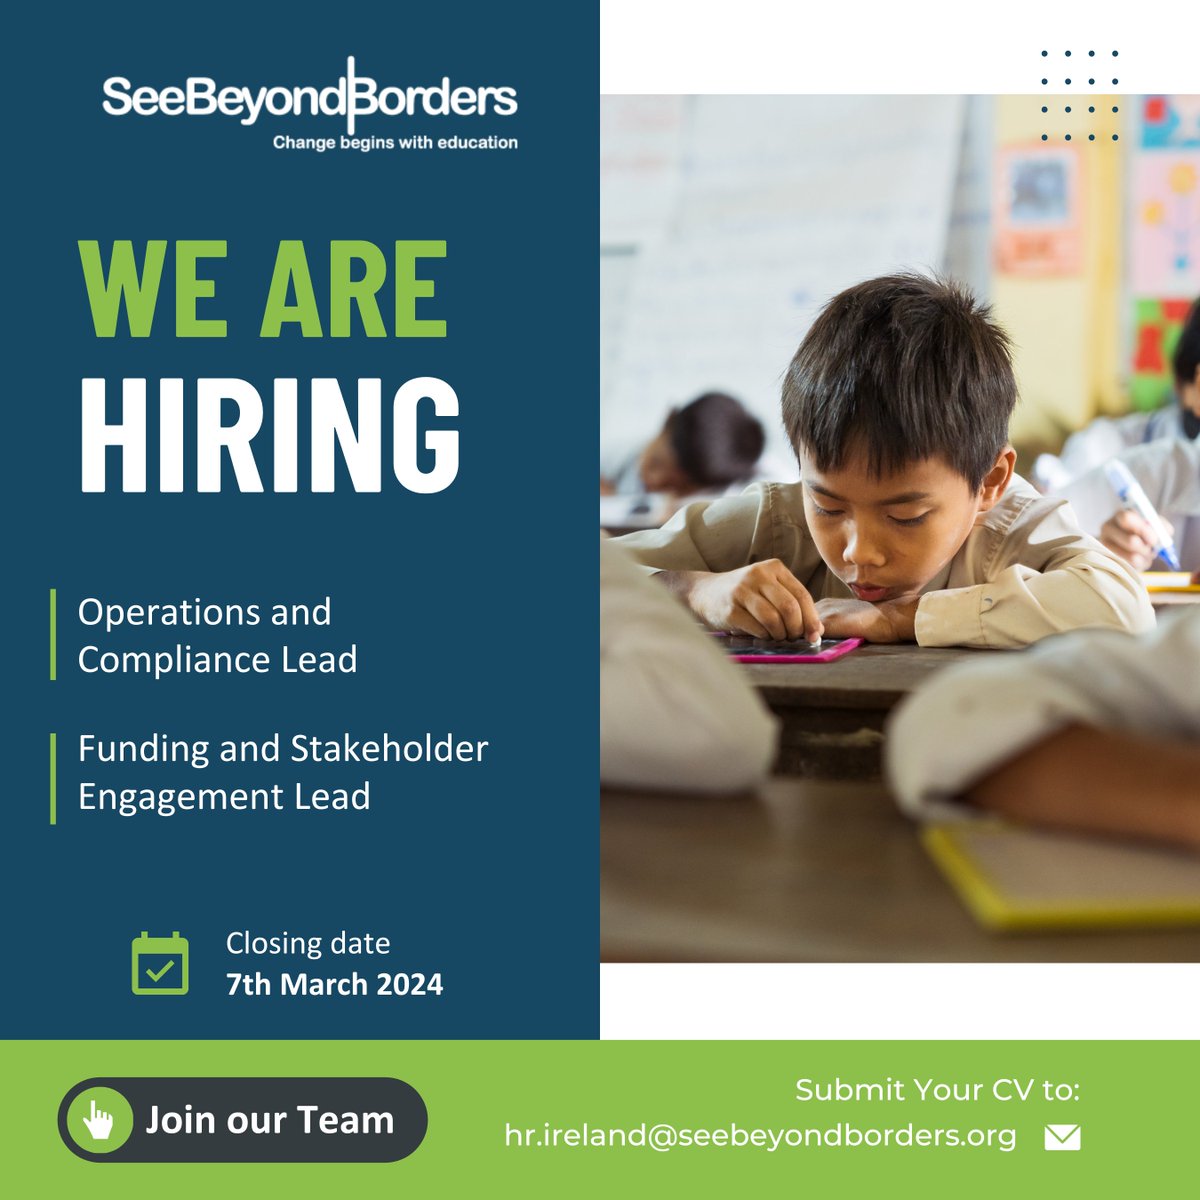 SeeBeyondBorders Ireland is hiring! We are hiring 2 Professional Leads, to lead our work in Funding and Stakeholder Engagement and in Operations and Compliance respectively. Full details on each position can be found here: seebeyondborders.ie/work-with-us/